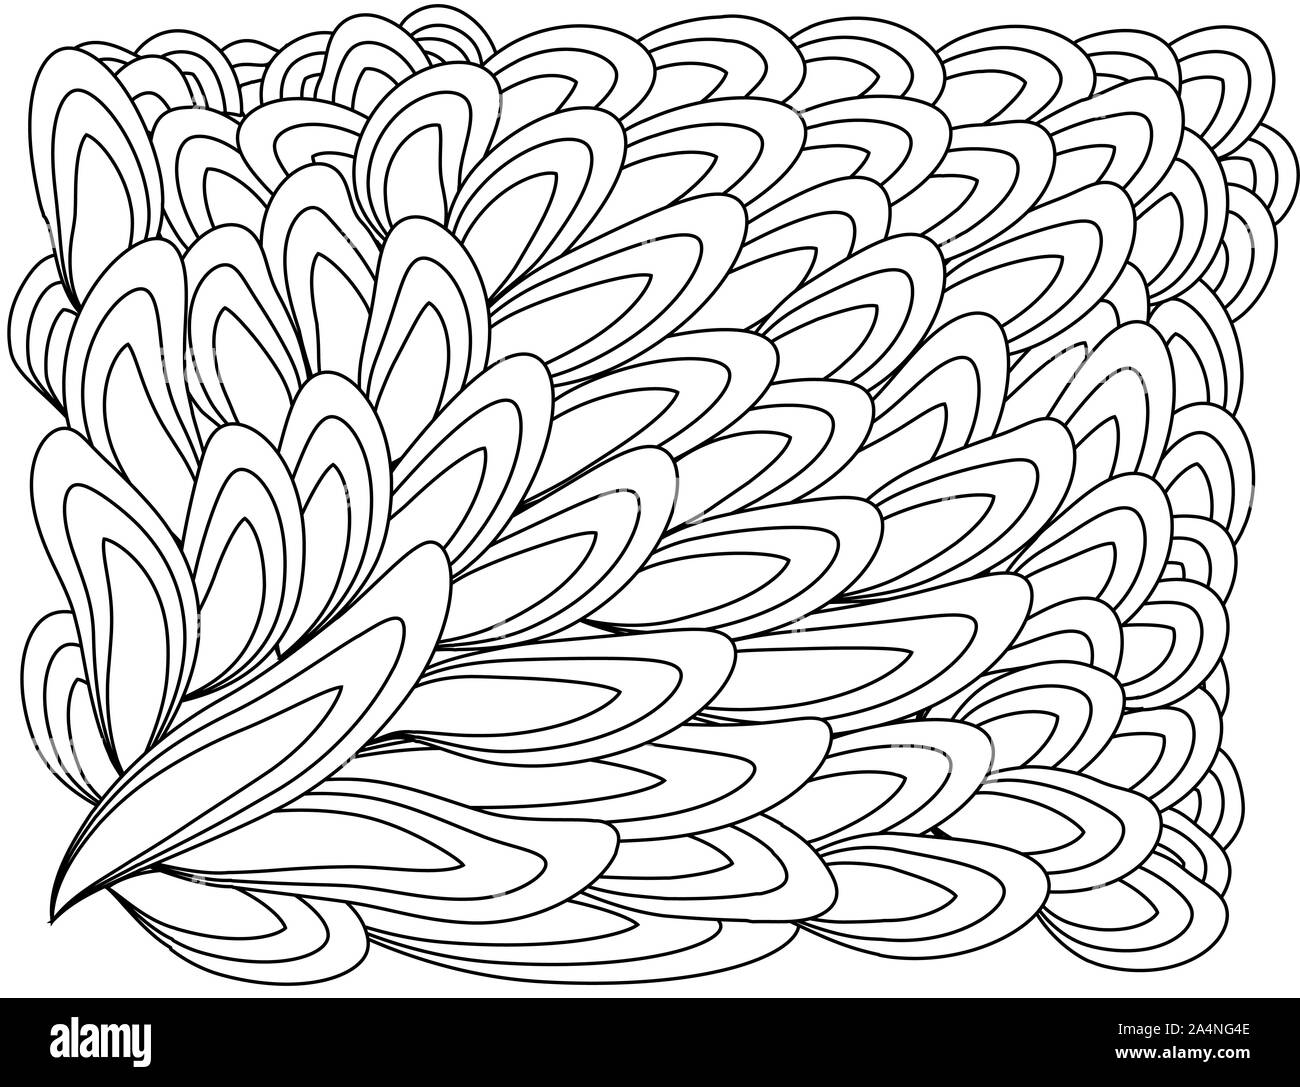 Pattern for Coloring Book. Ethnic Retro Design Stock Vector - Illustration  of drawing, arabic: 75024458